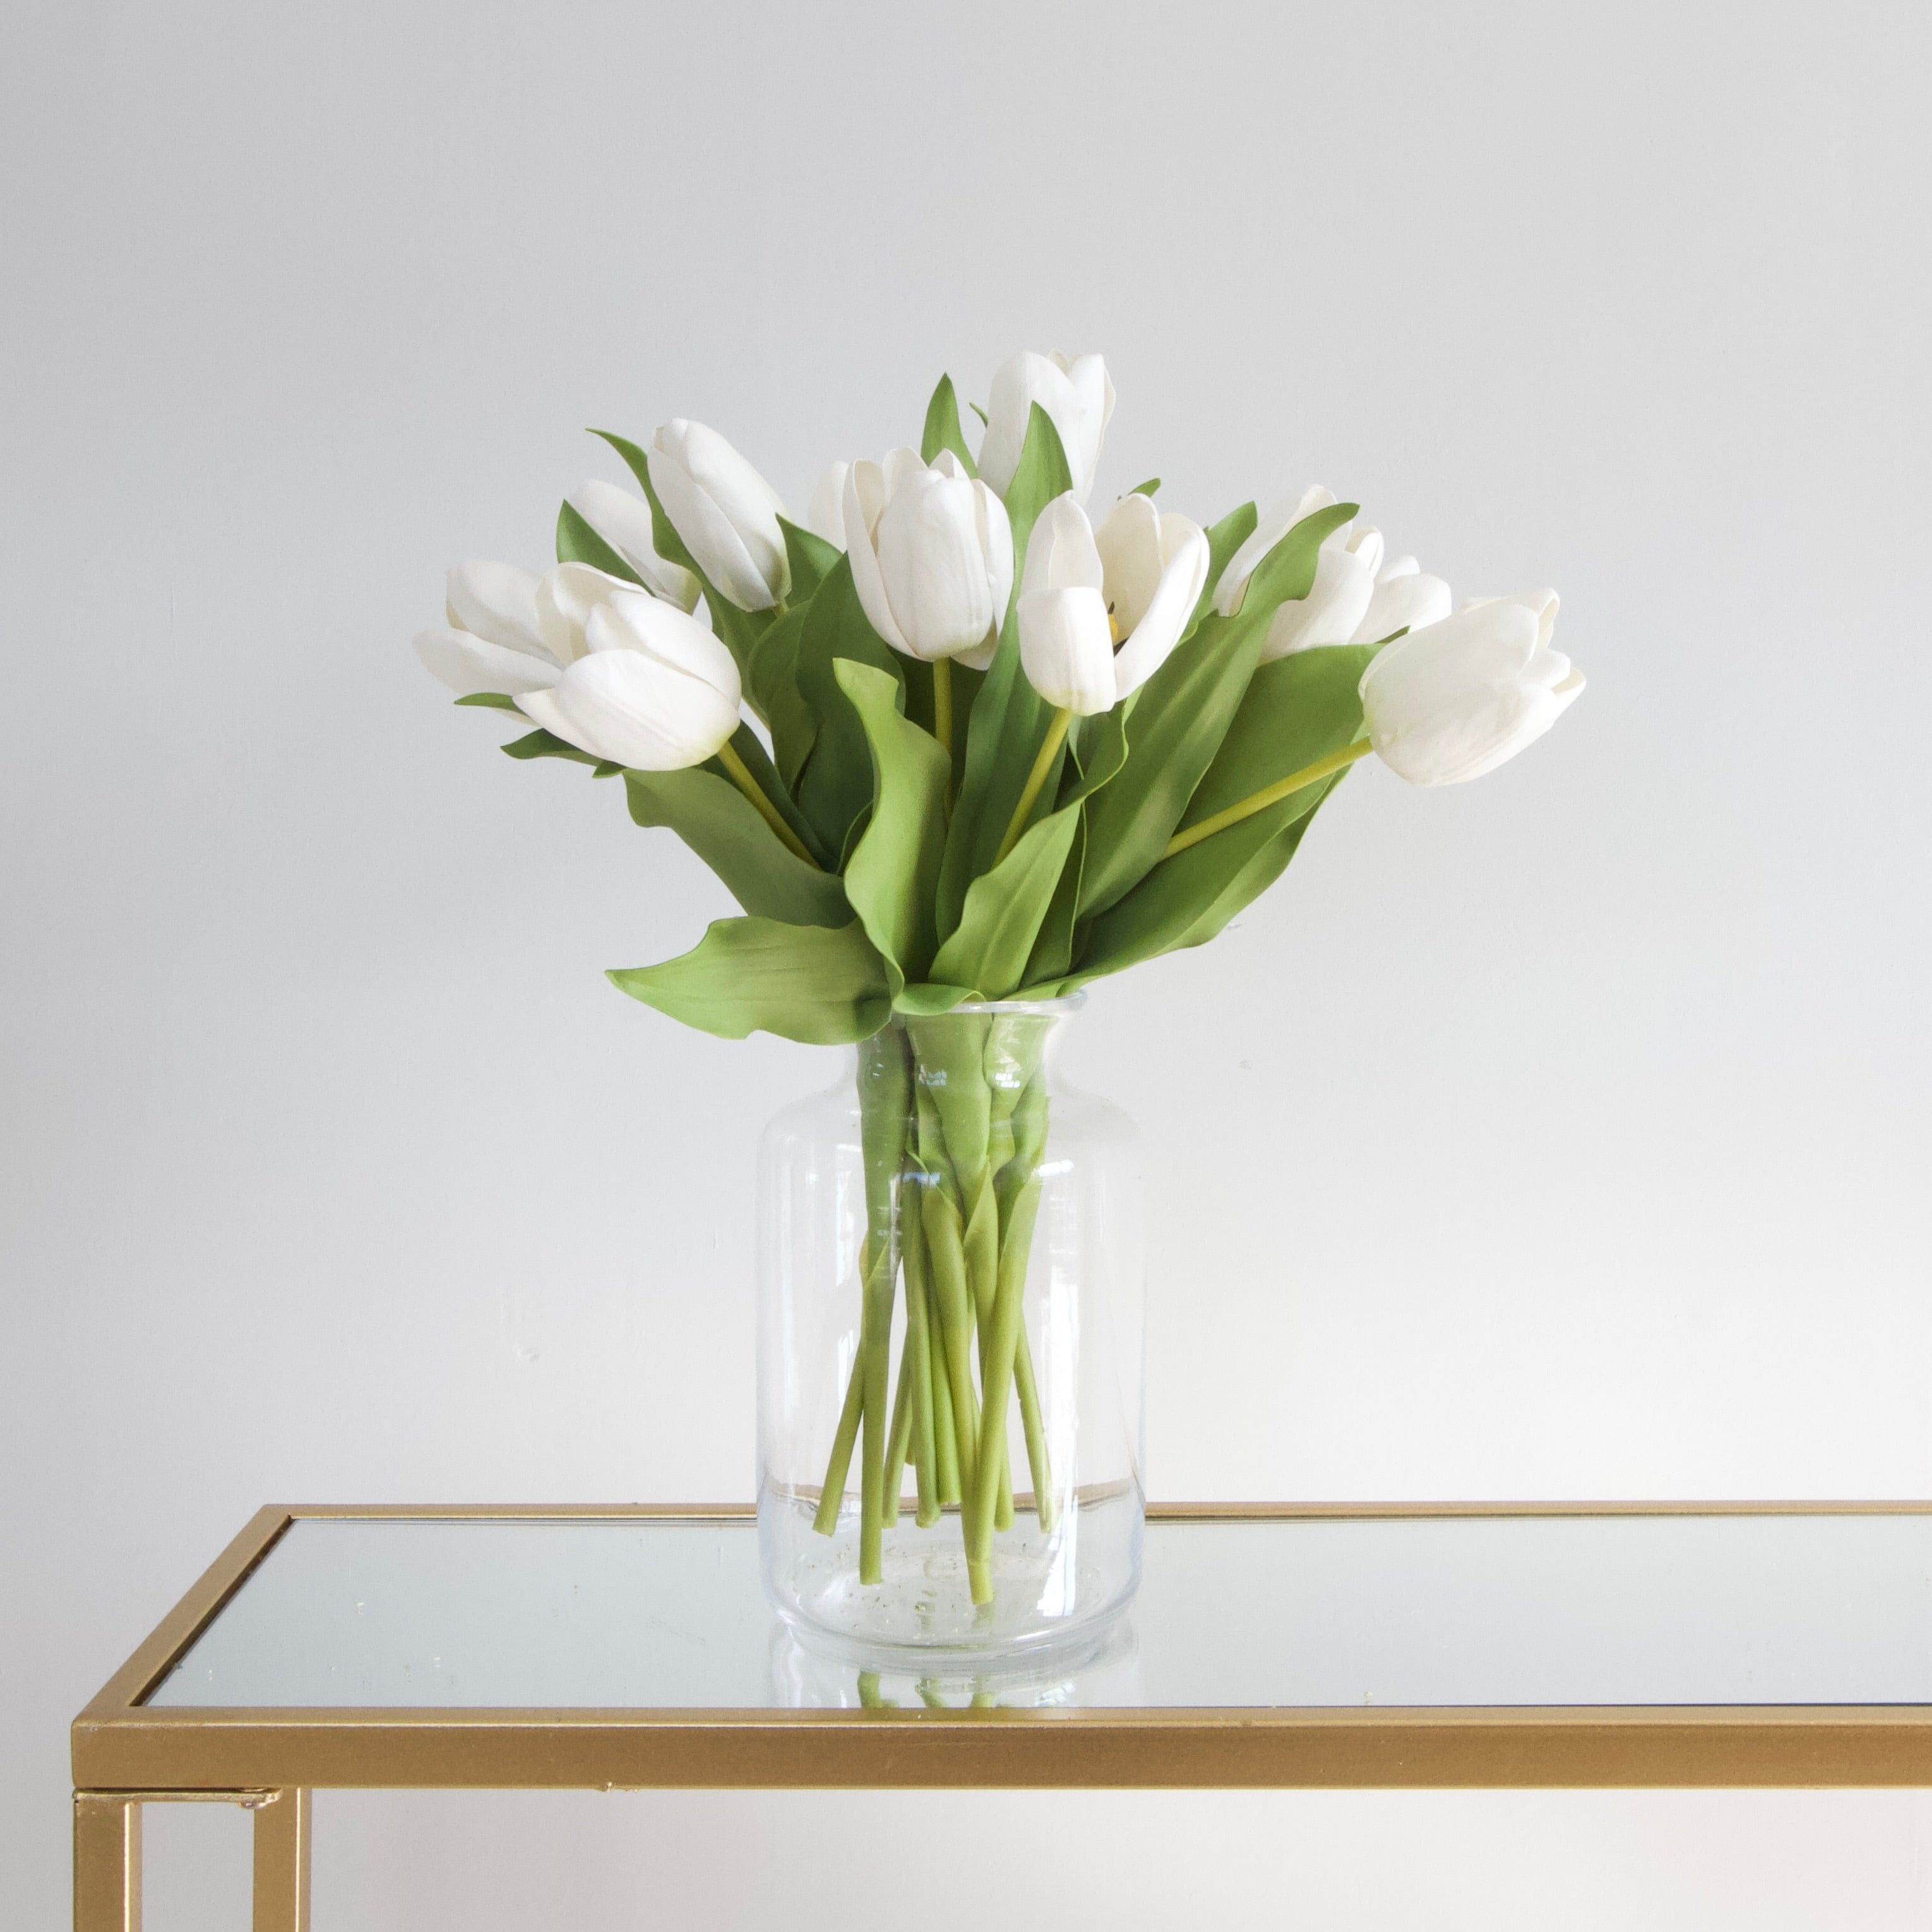 Luxury Lifelike Realistic Artificial Fabric Silk Blooms with Foliage Buy Online from The Faux Flower Company | 12 stems of Short Open White Tulip ABY2618WH styled in Clear Glass Medium Funnel Neck Vase ABV2252